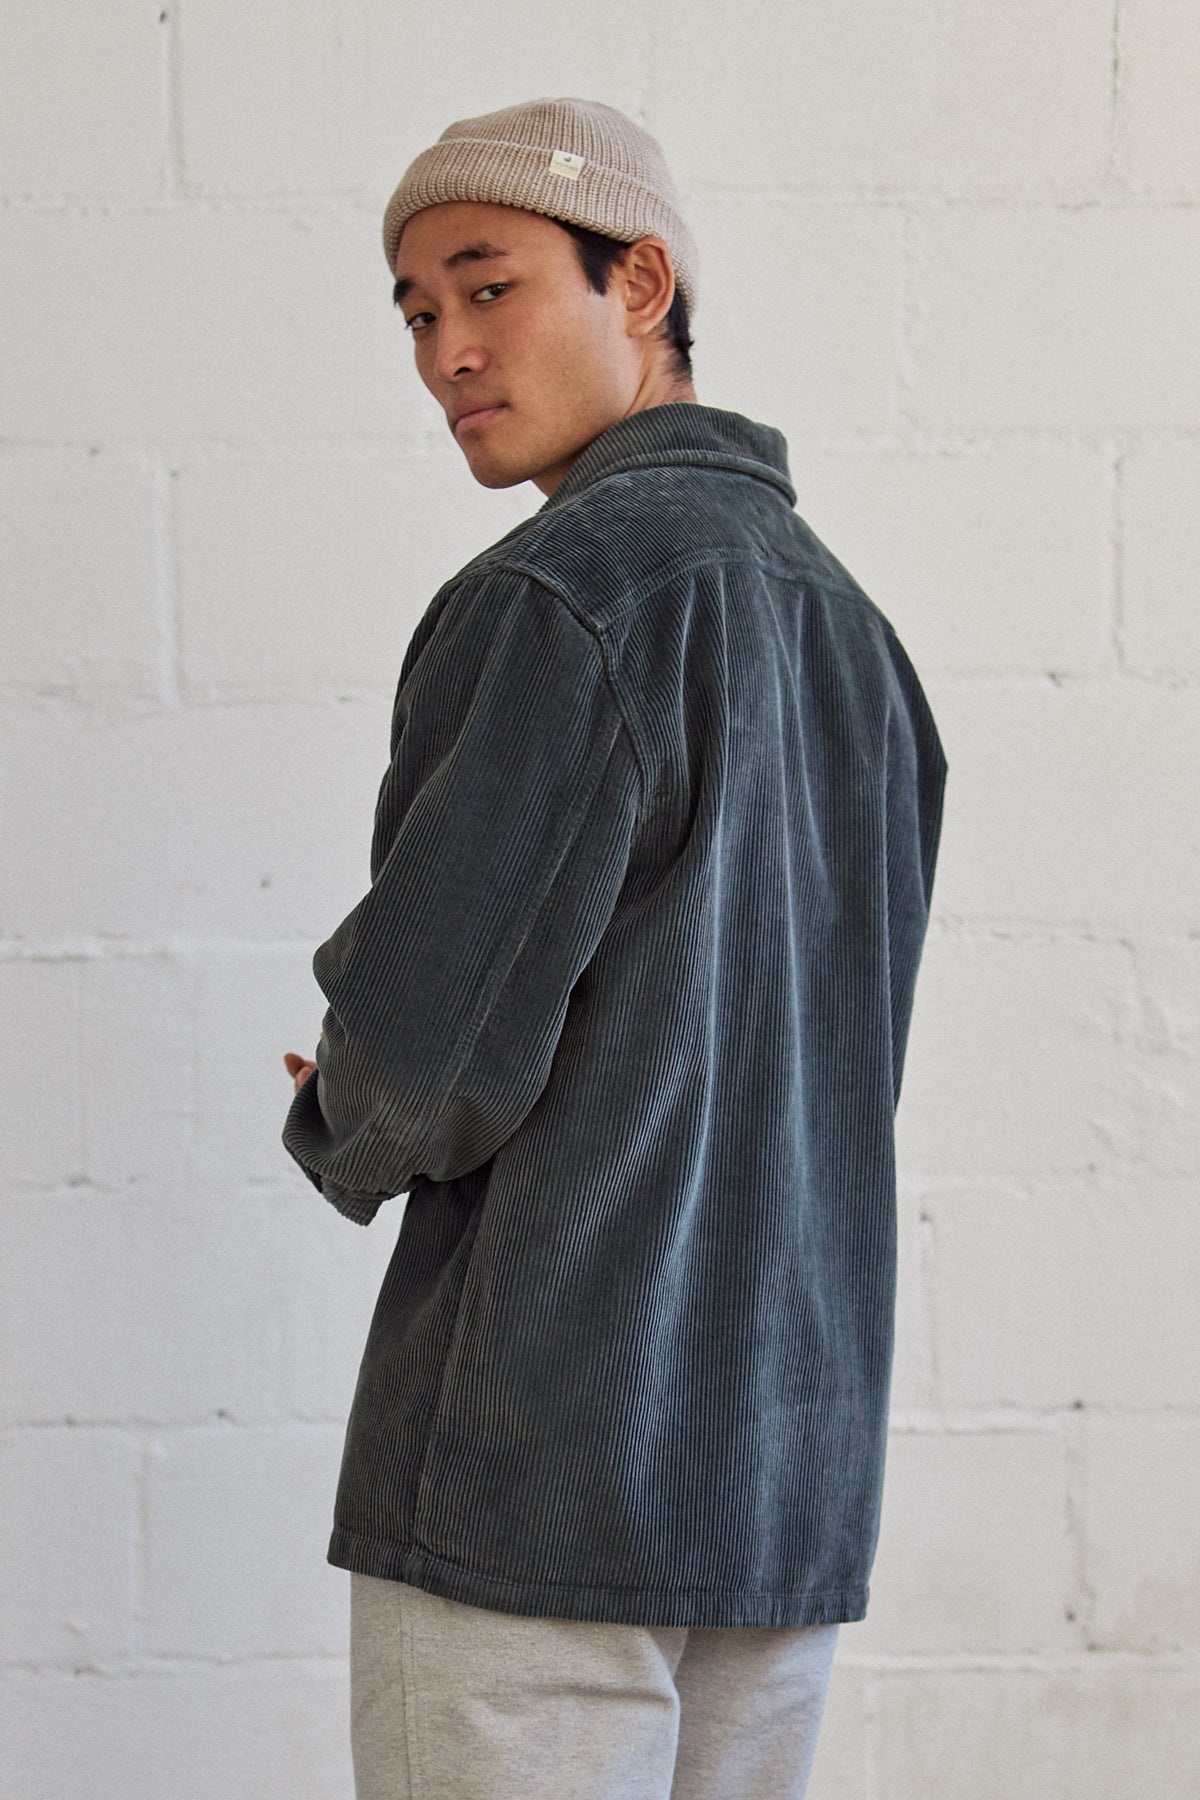 6 Sustainable Oversized Jackets You'll Adore – TWOTHIRDS